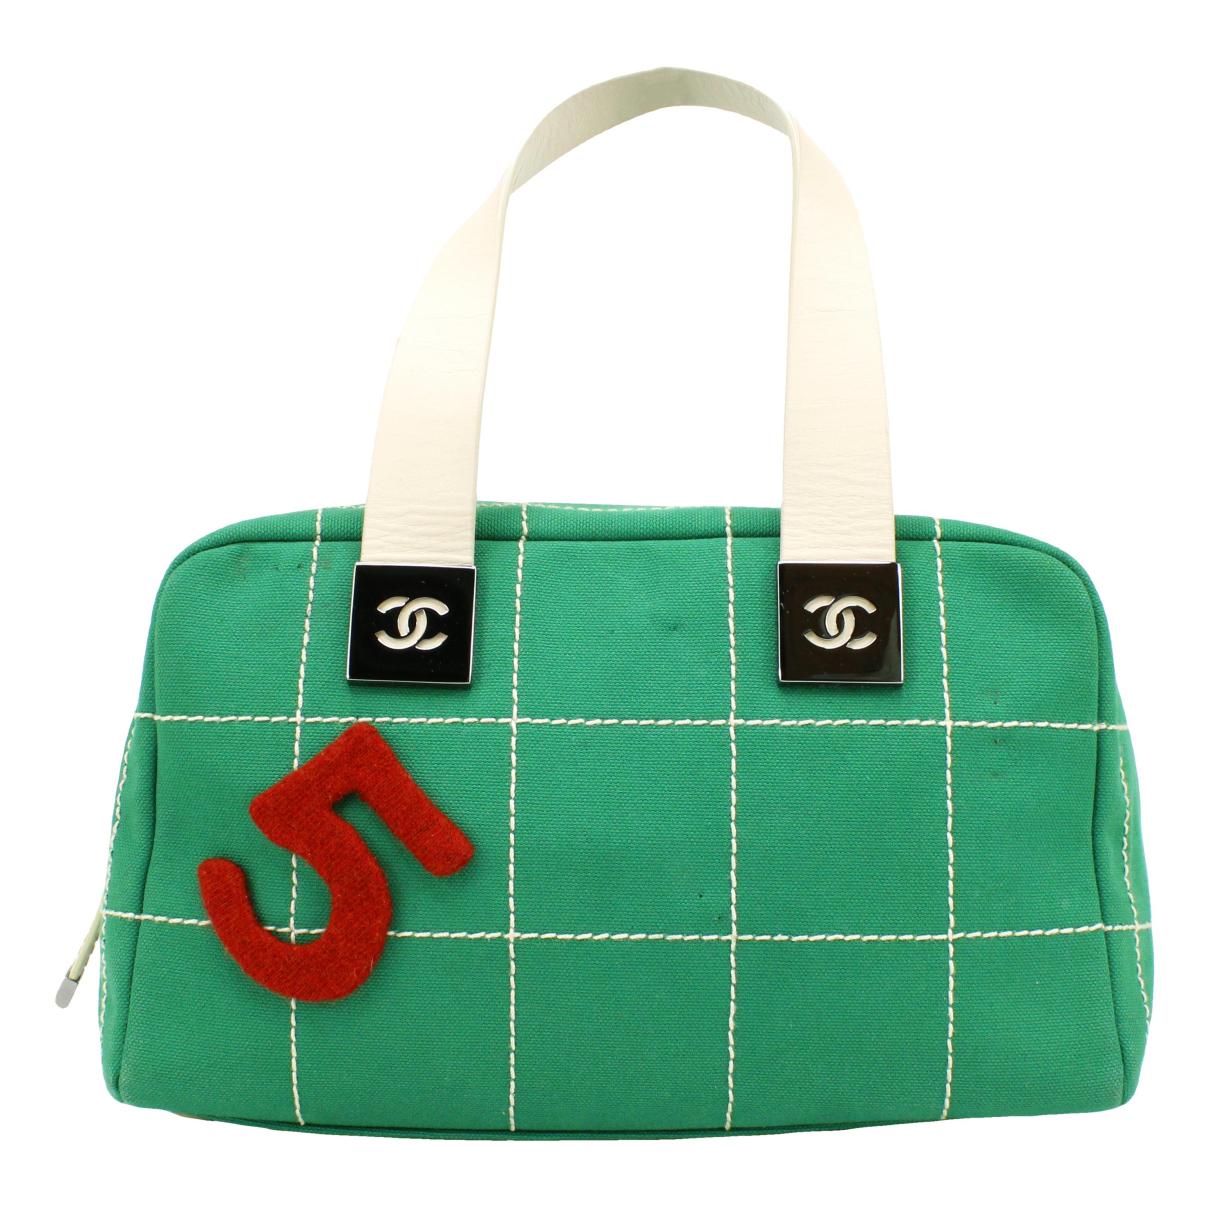 Auth CHANEL Cambon Line CC Green Quilted Leather Shoulder Bag Purse #42942